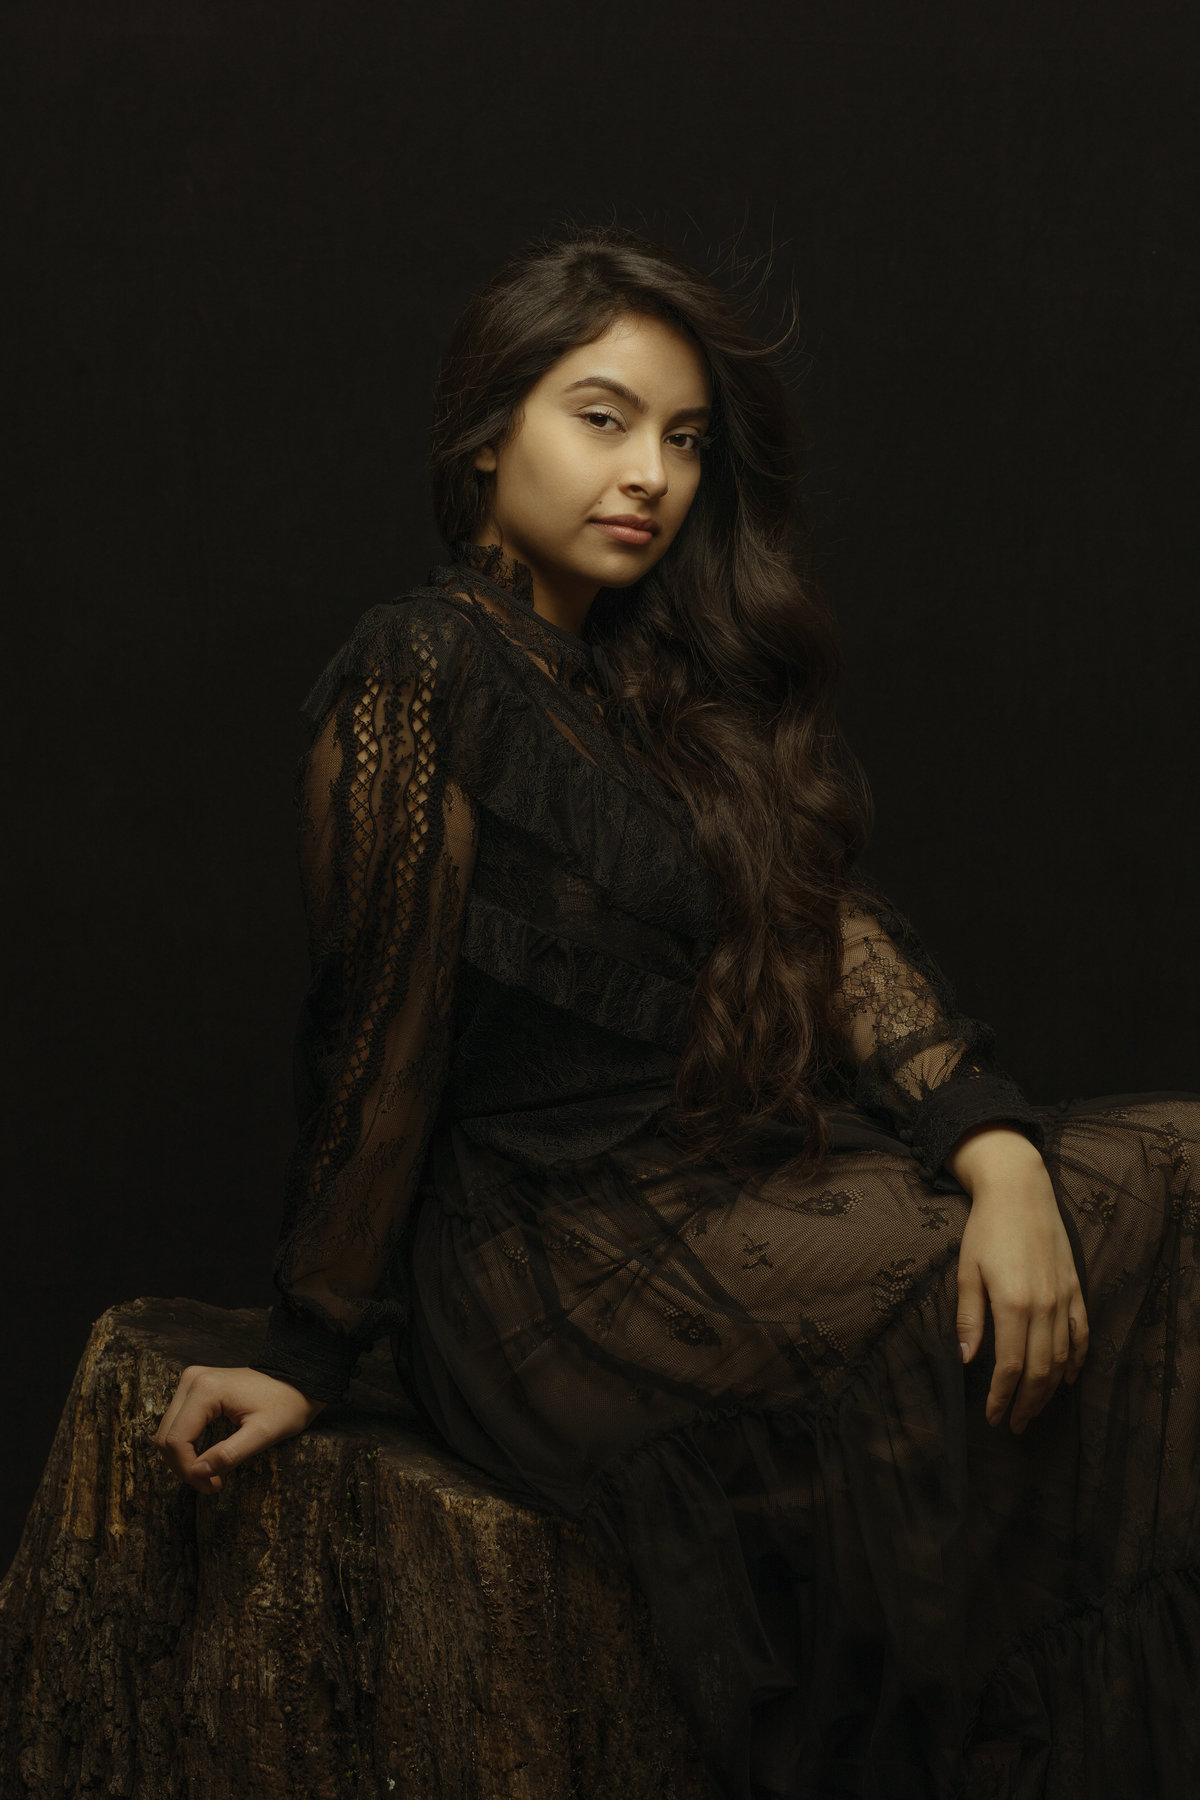 Portrait Photo Of Young Woman In Dress Sitting On a Wood Los Angeles